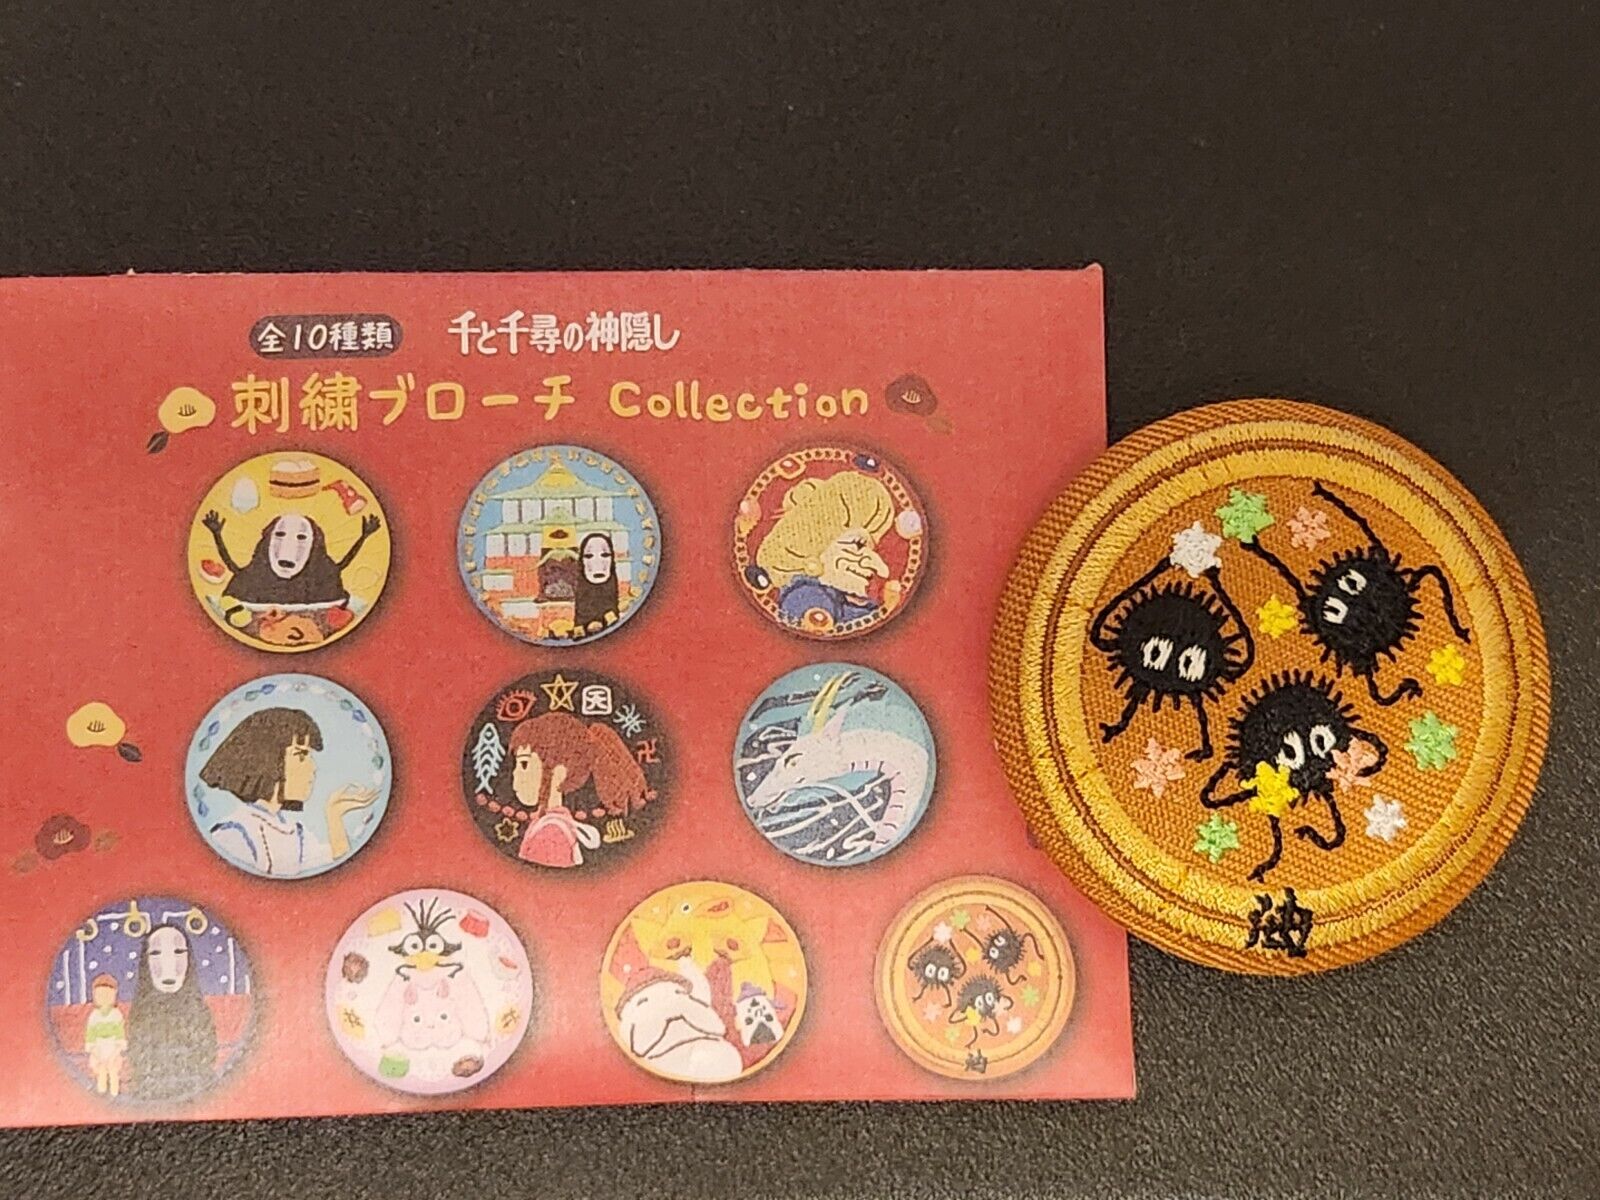 Spirited Away Embroidered Collection Badge - Susuwatari Soot Sprites